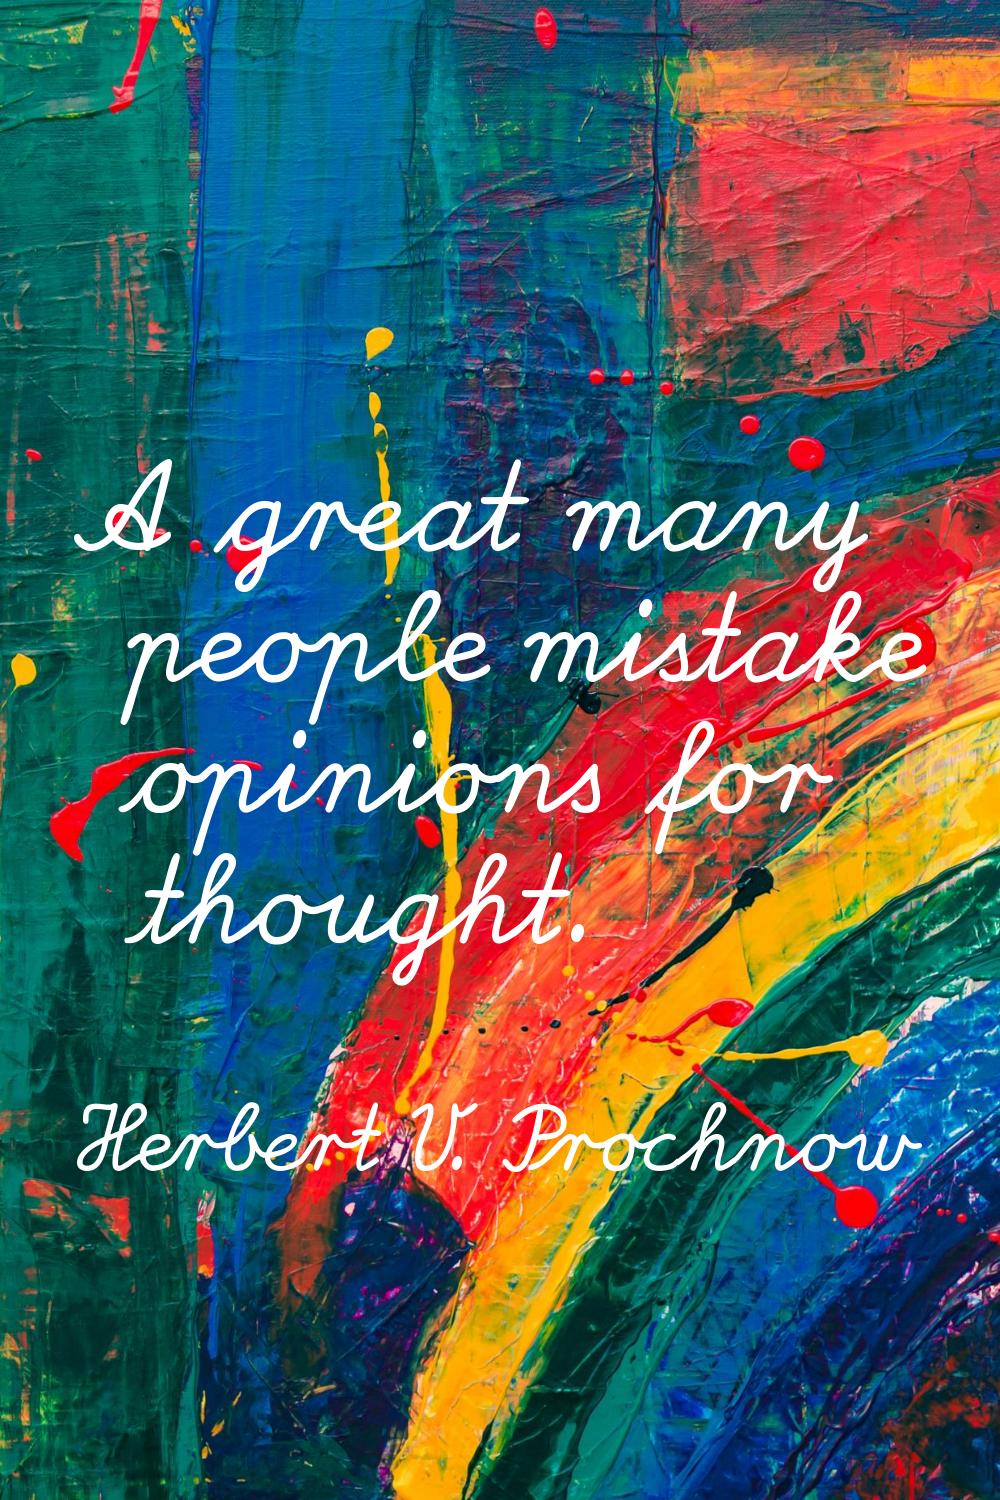 A great many people mistake opinions for thought.